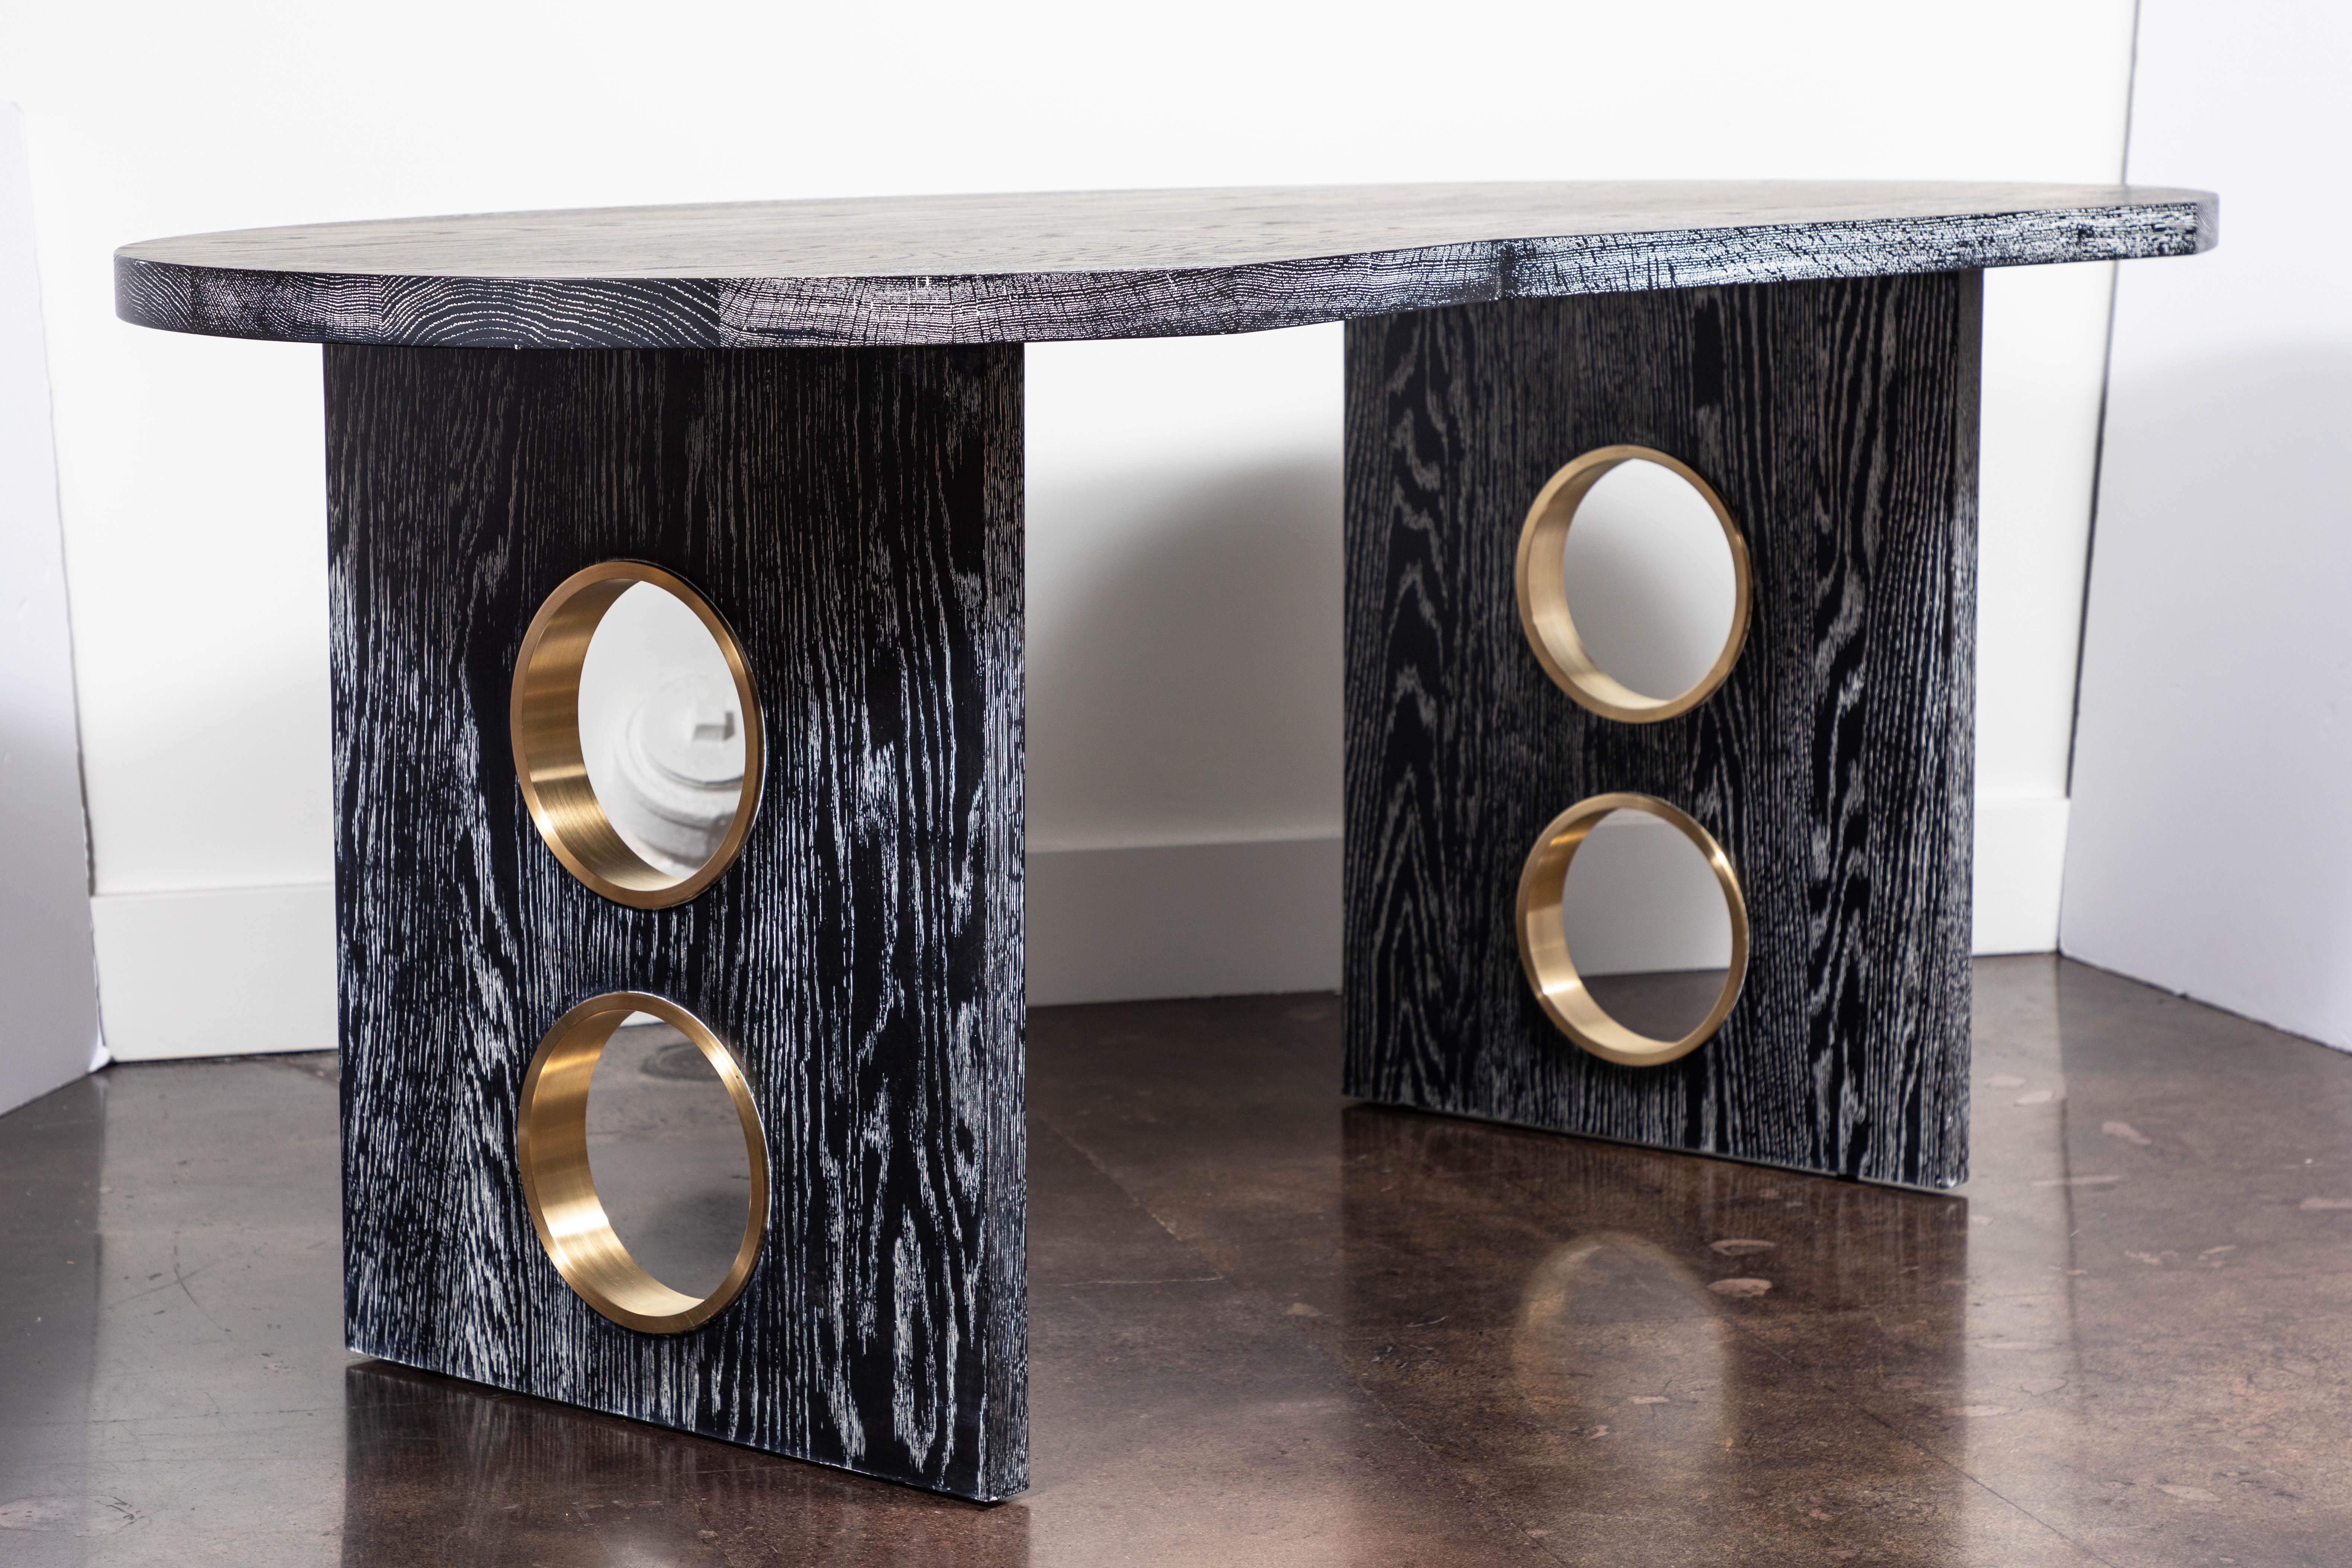 Glamorous desk in cerused oak with brass porthole details on the legs by On Madison. To order, 8-10 weeks. Custom ceruse colors and choice of brass, chrome or nickel metal detail available.